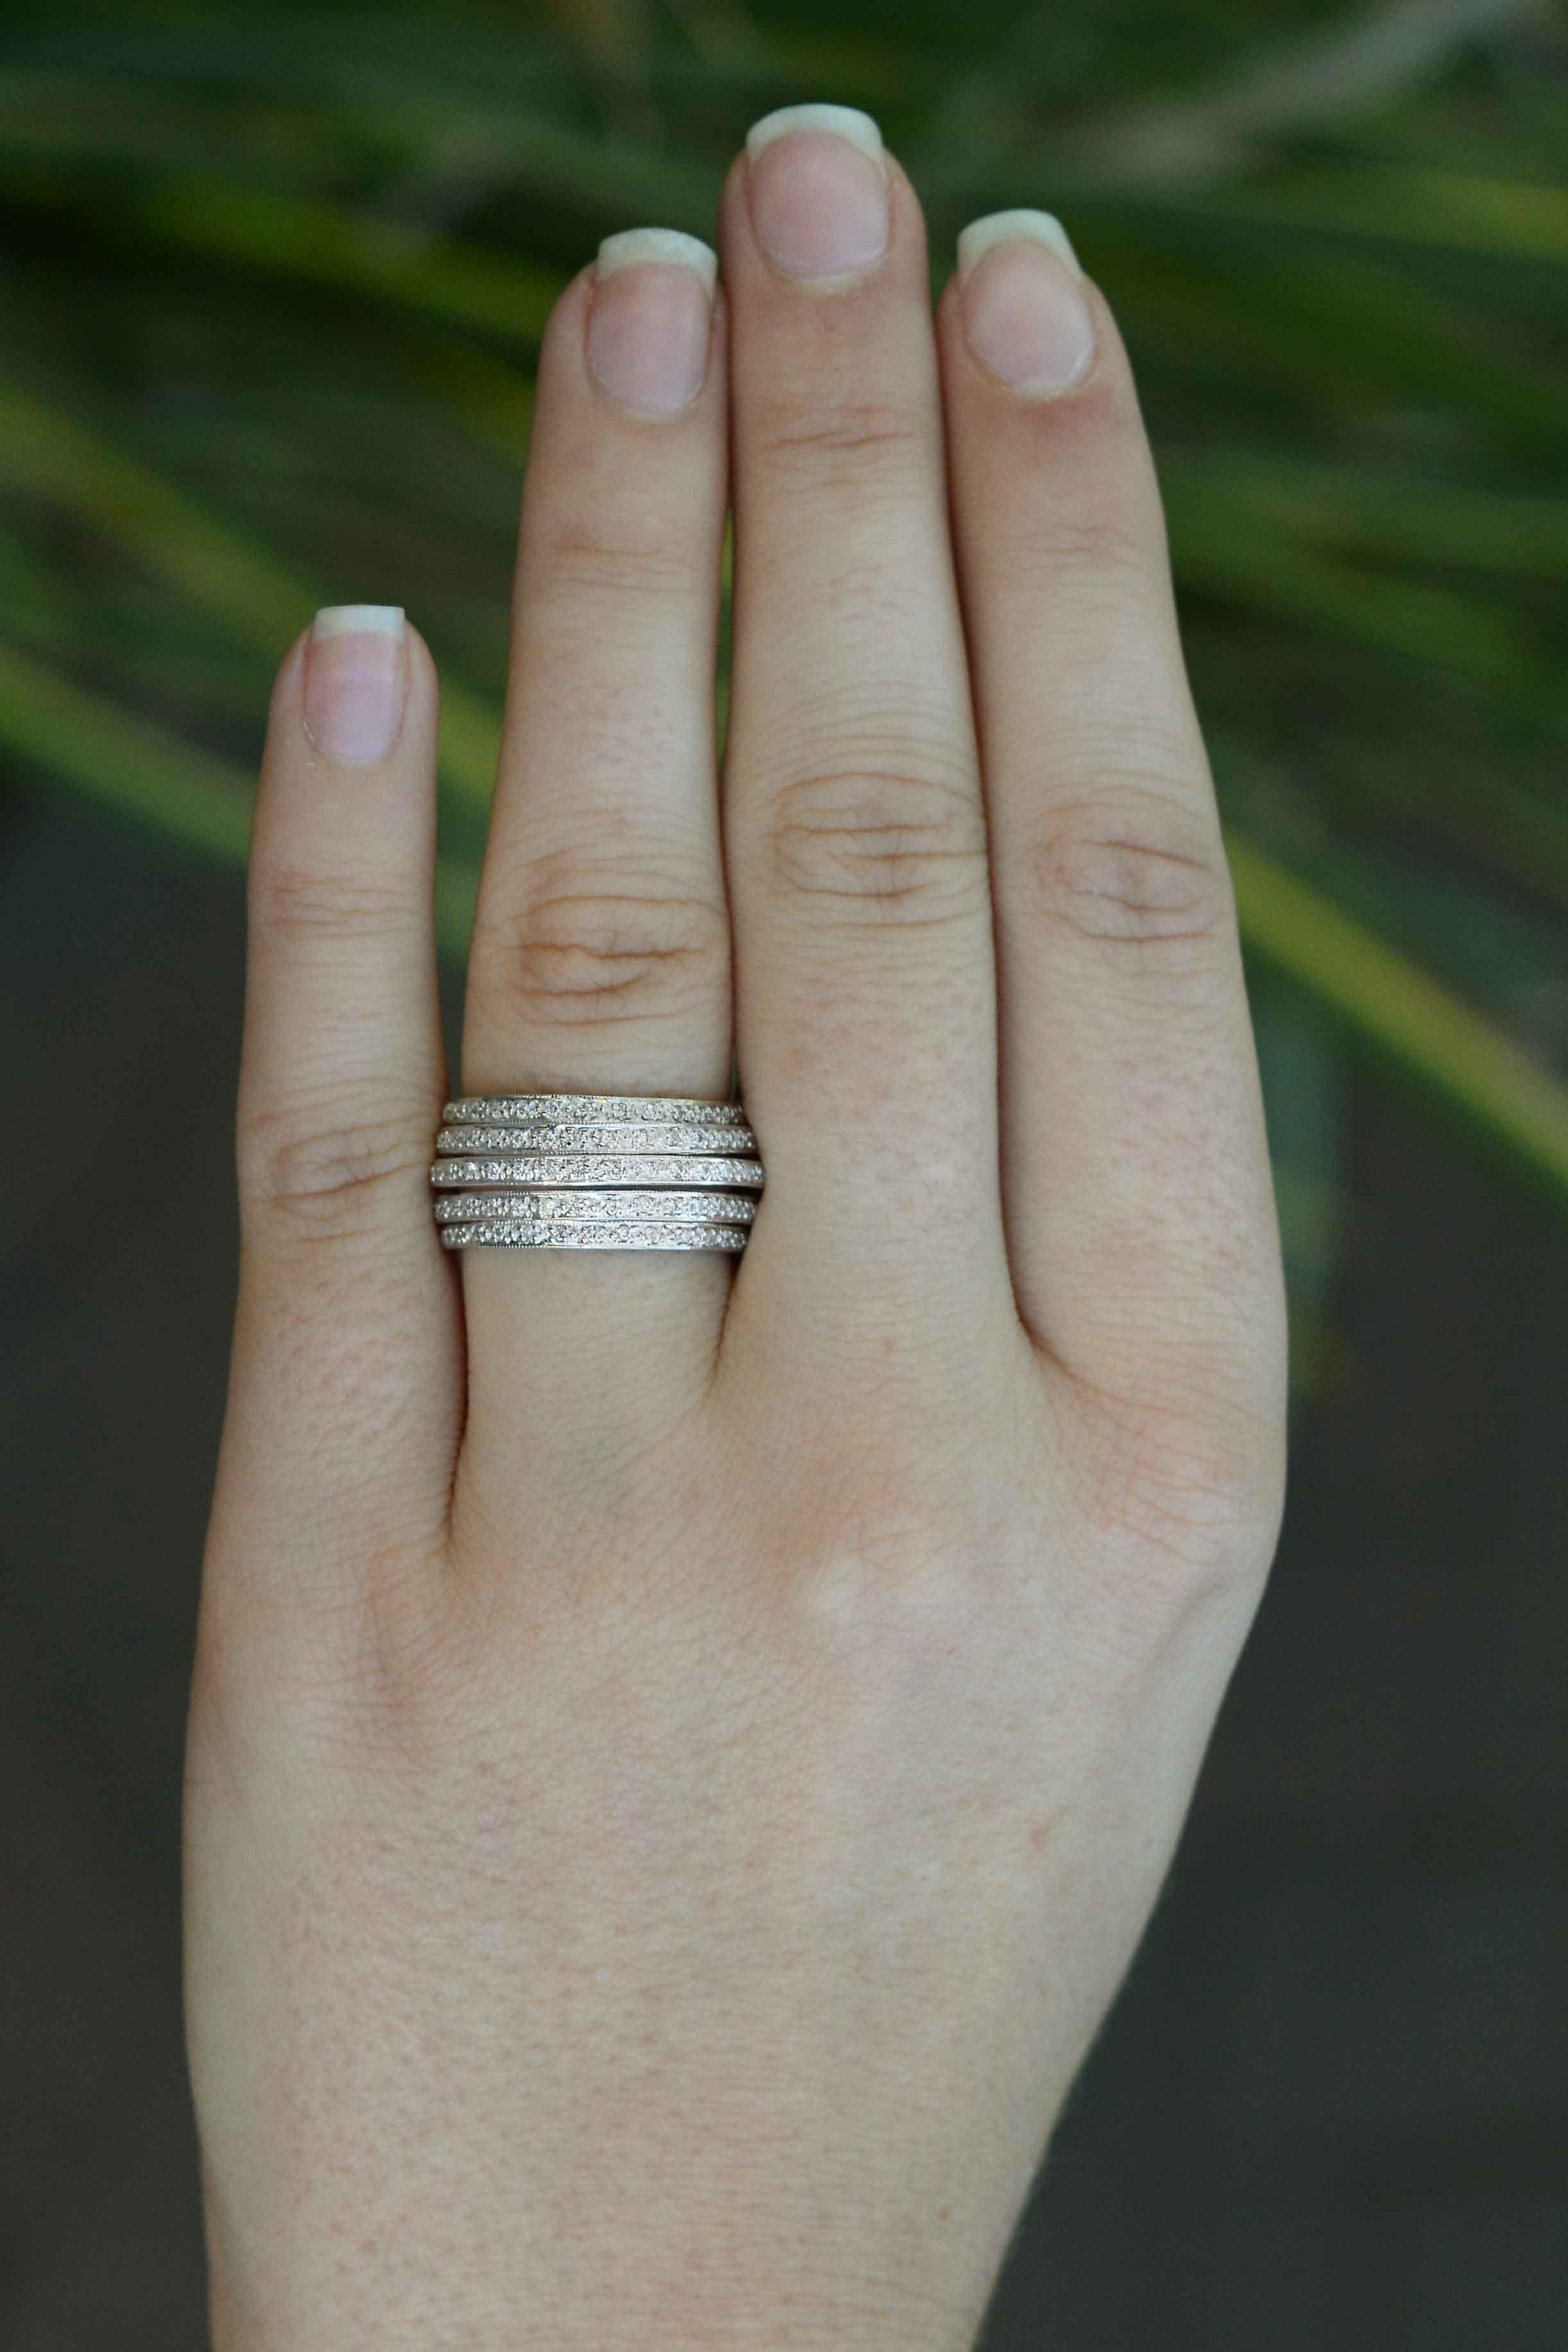 A glamorous 5-row diamond cigar band anniversary ring that makes a bold statement. The tiered rows give this ring height and presence, showing off the diamonds beautifully. We love this ring for its versatility which can be worn as a statement piece